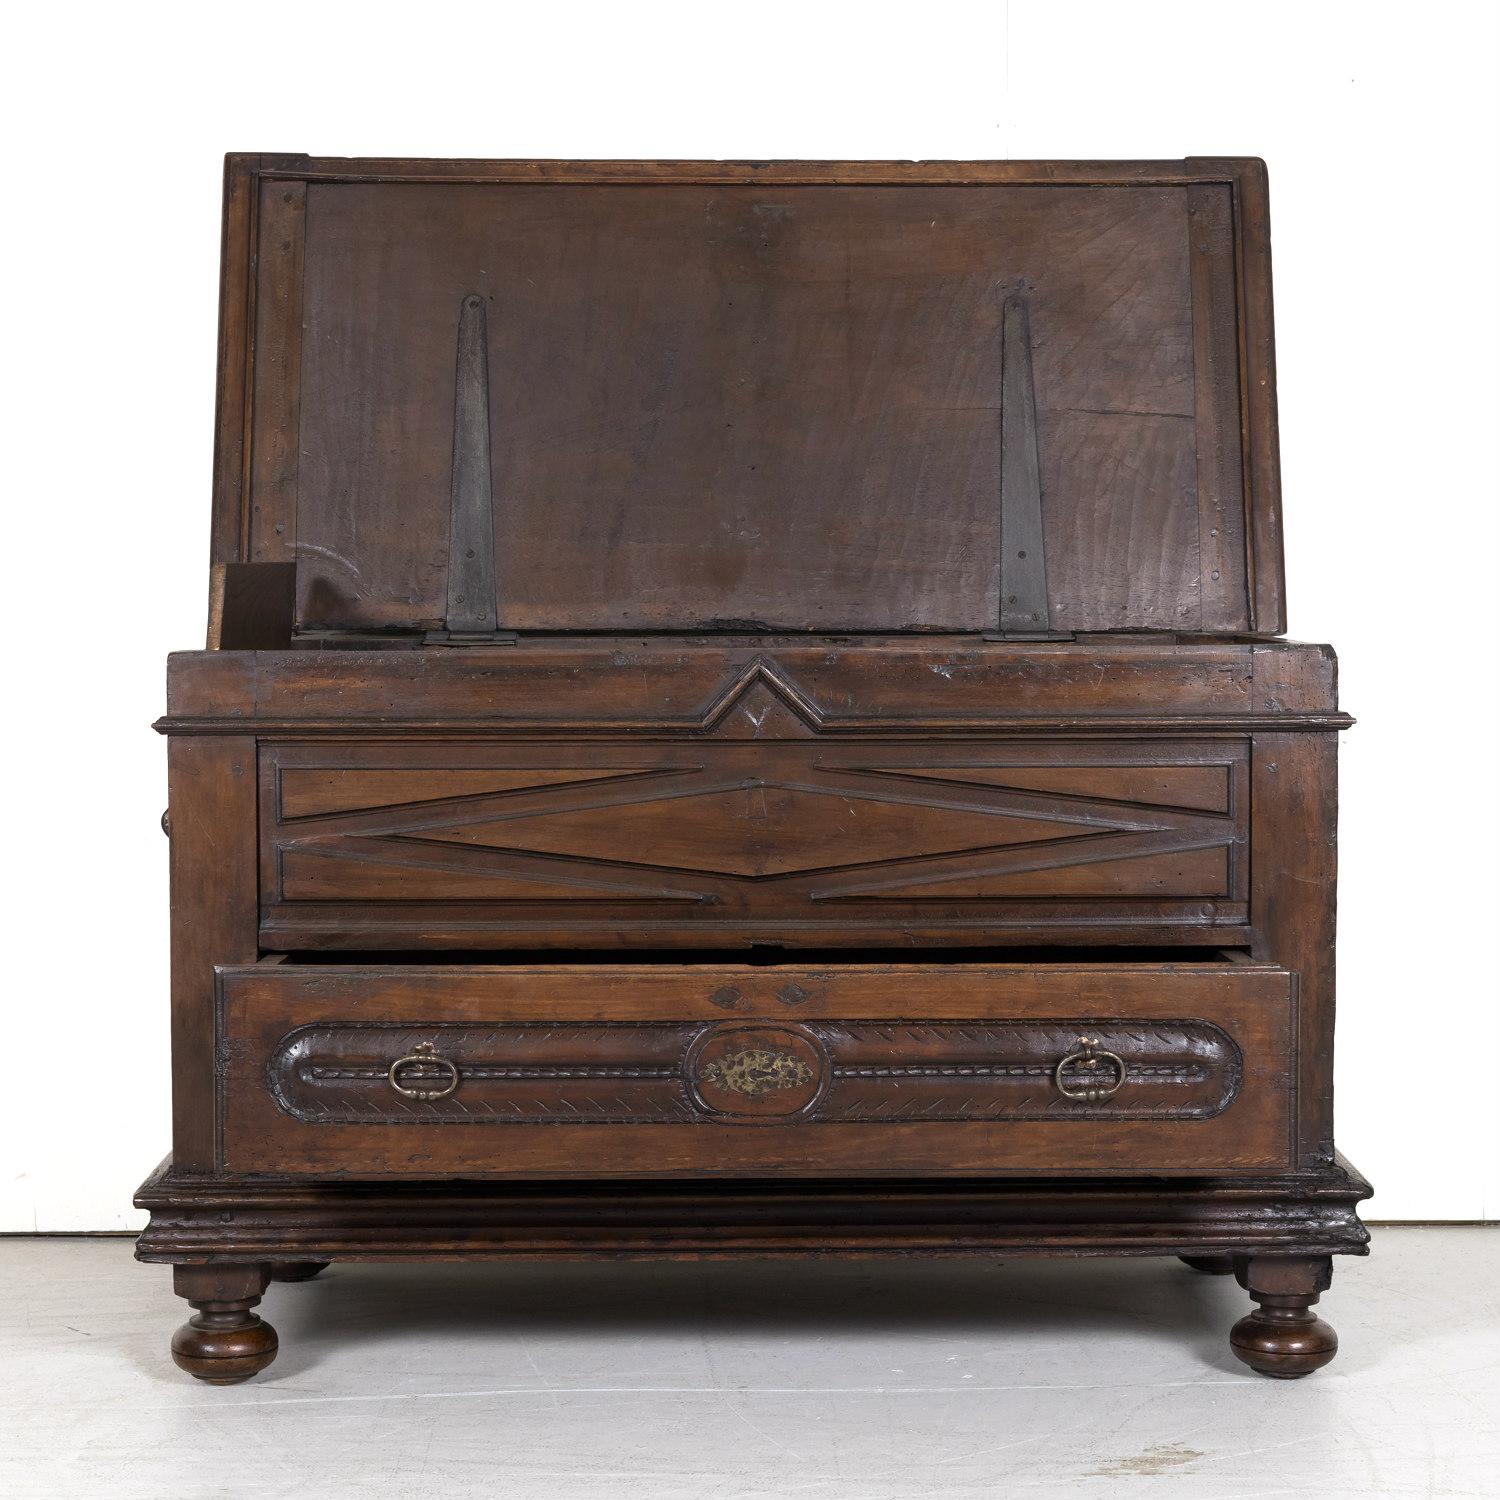 Early 18th Century Louis XIII Style Solid Walnut Coffer or Trunk with Drawer For Sale 2